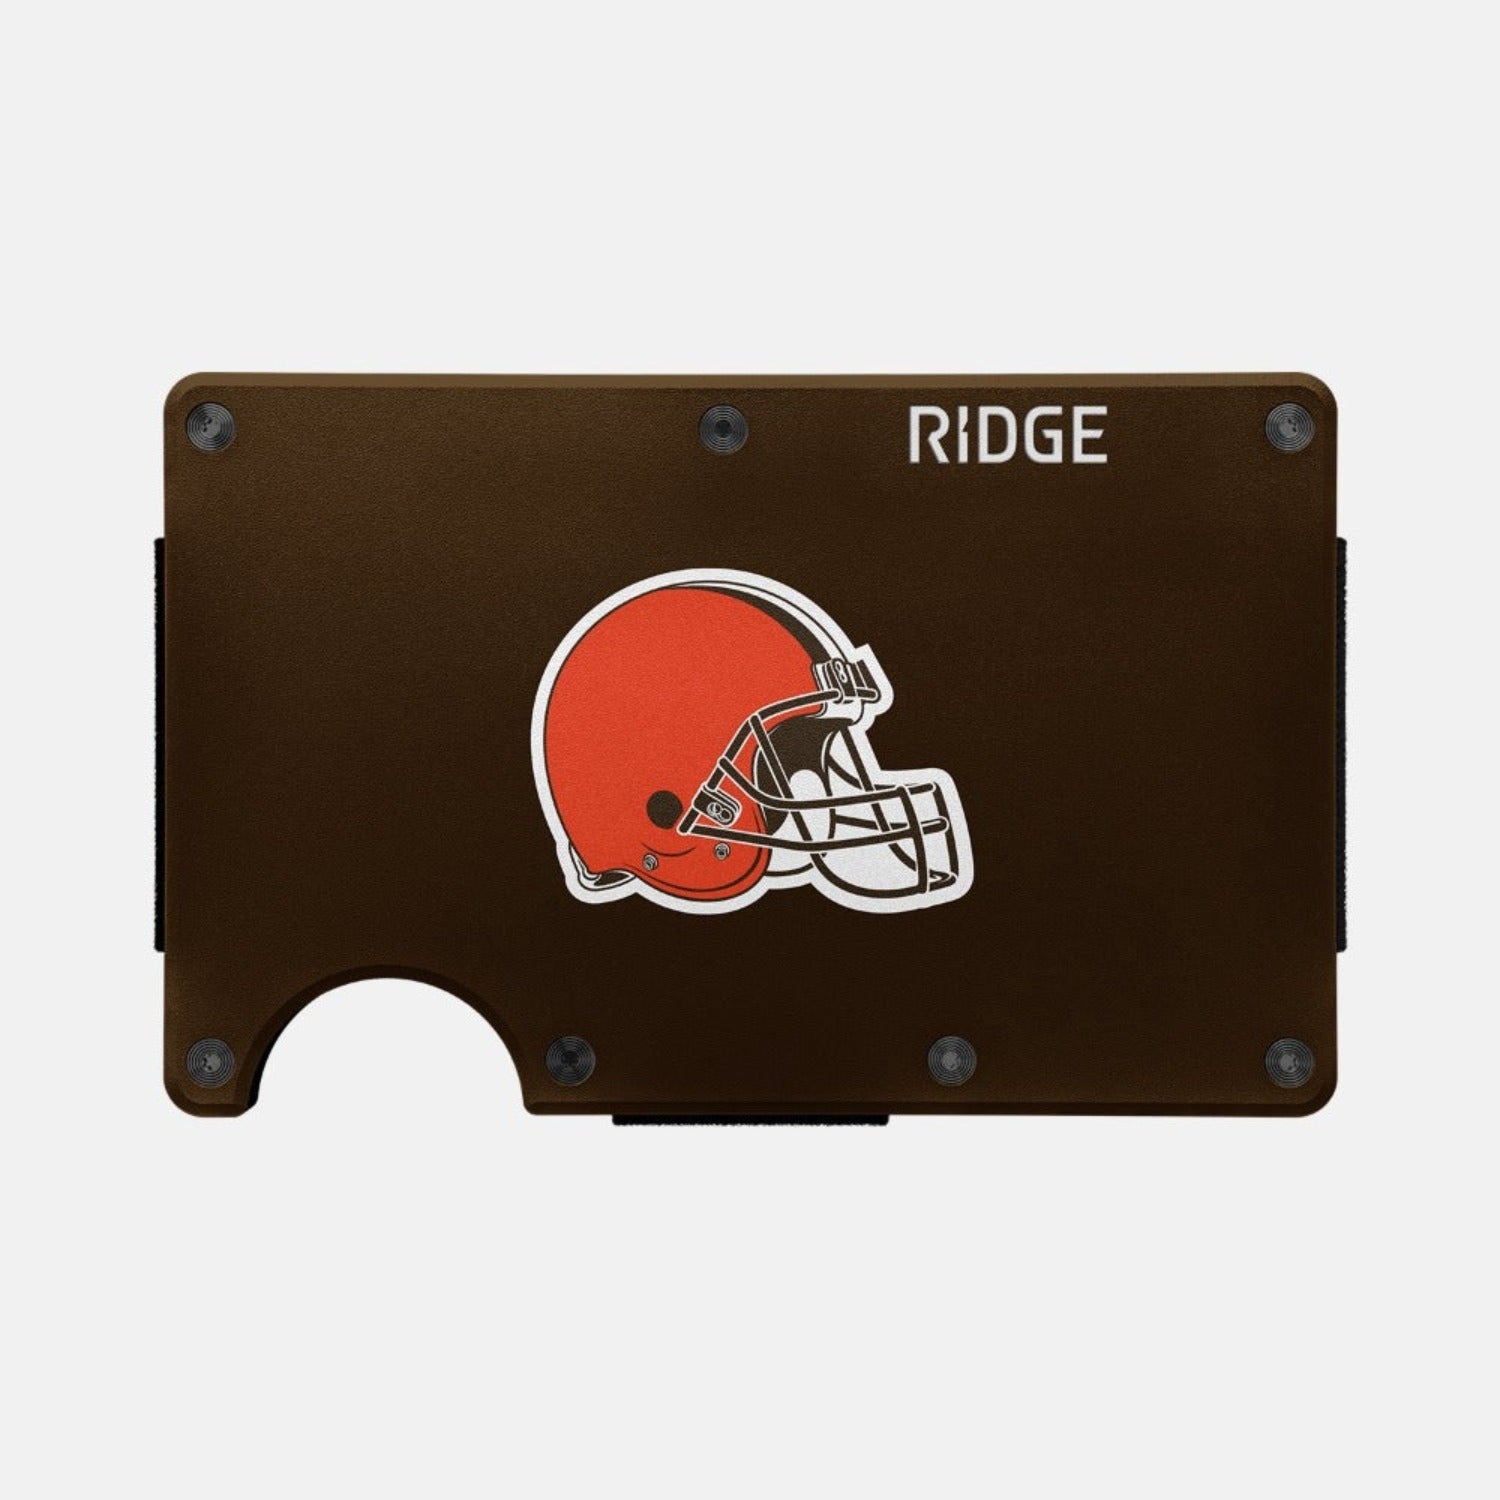 Cleveland Browns Gift Boxes  Official Cleveland Browns Shop